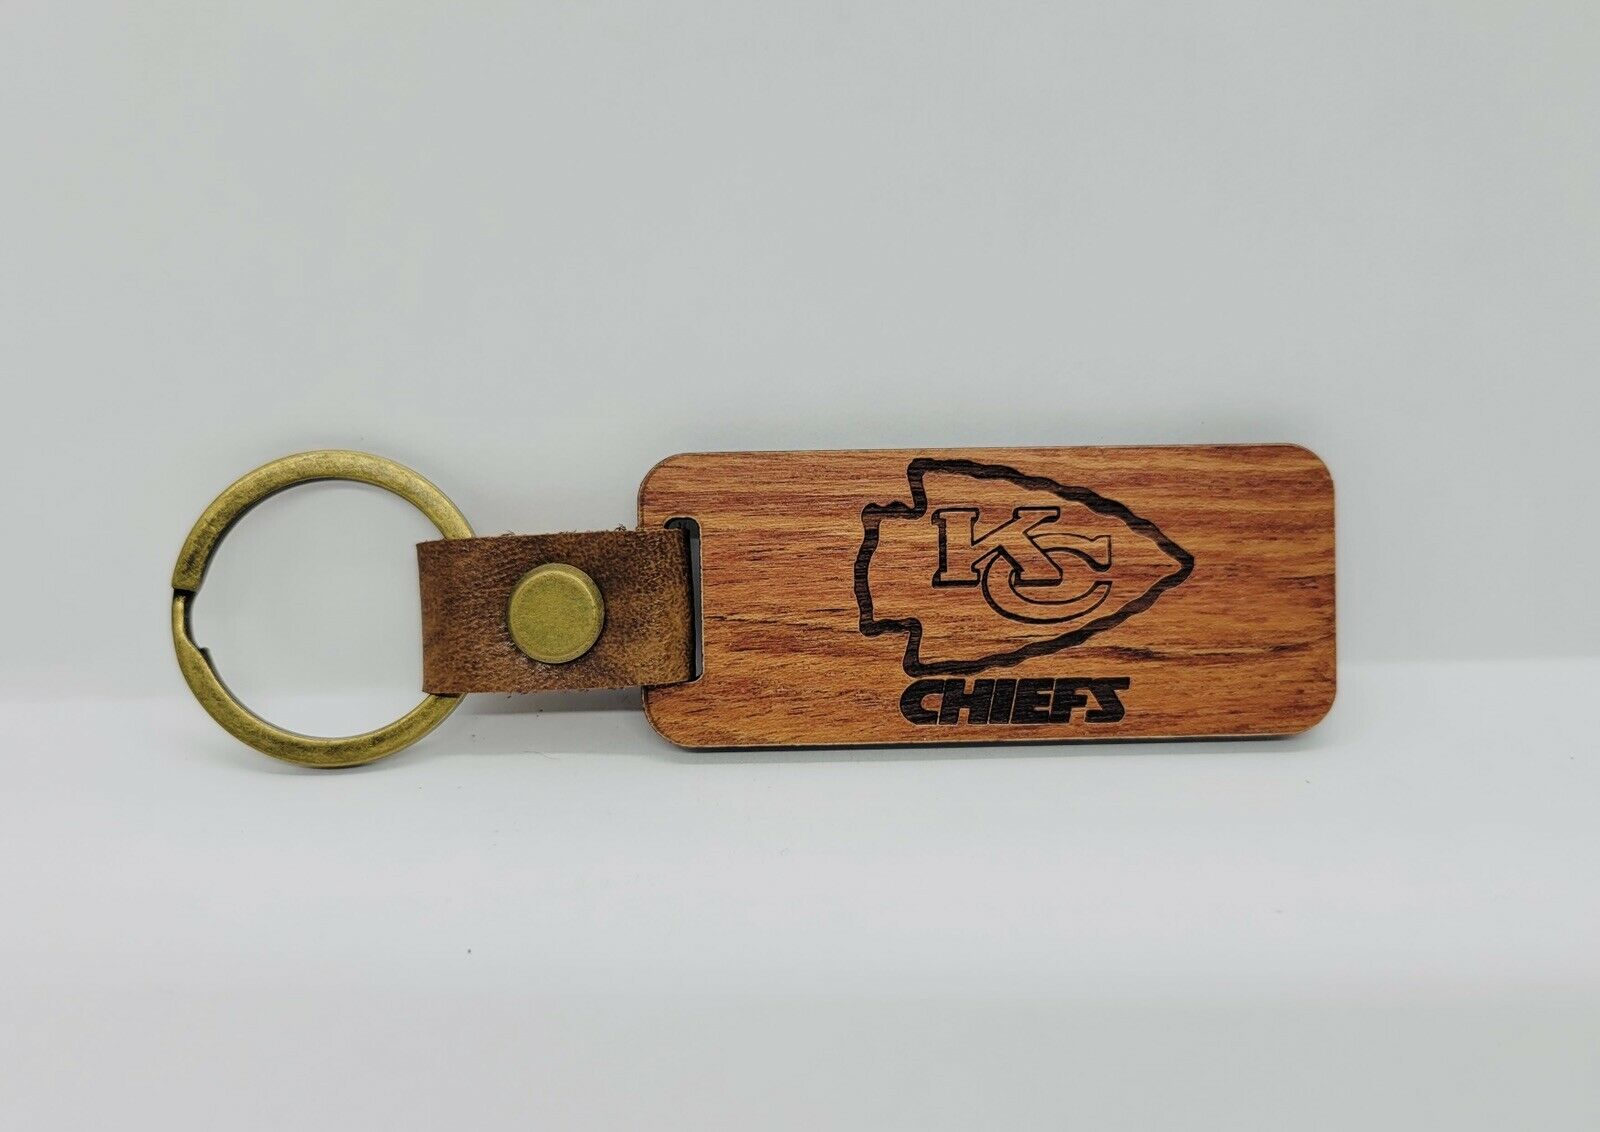 Kc Chiefs Engraved Cherry Wood Keychain Pop Gift Custom Order Available